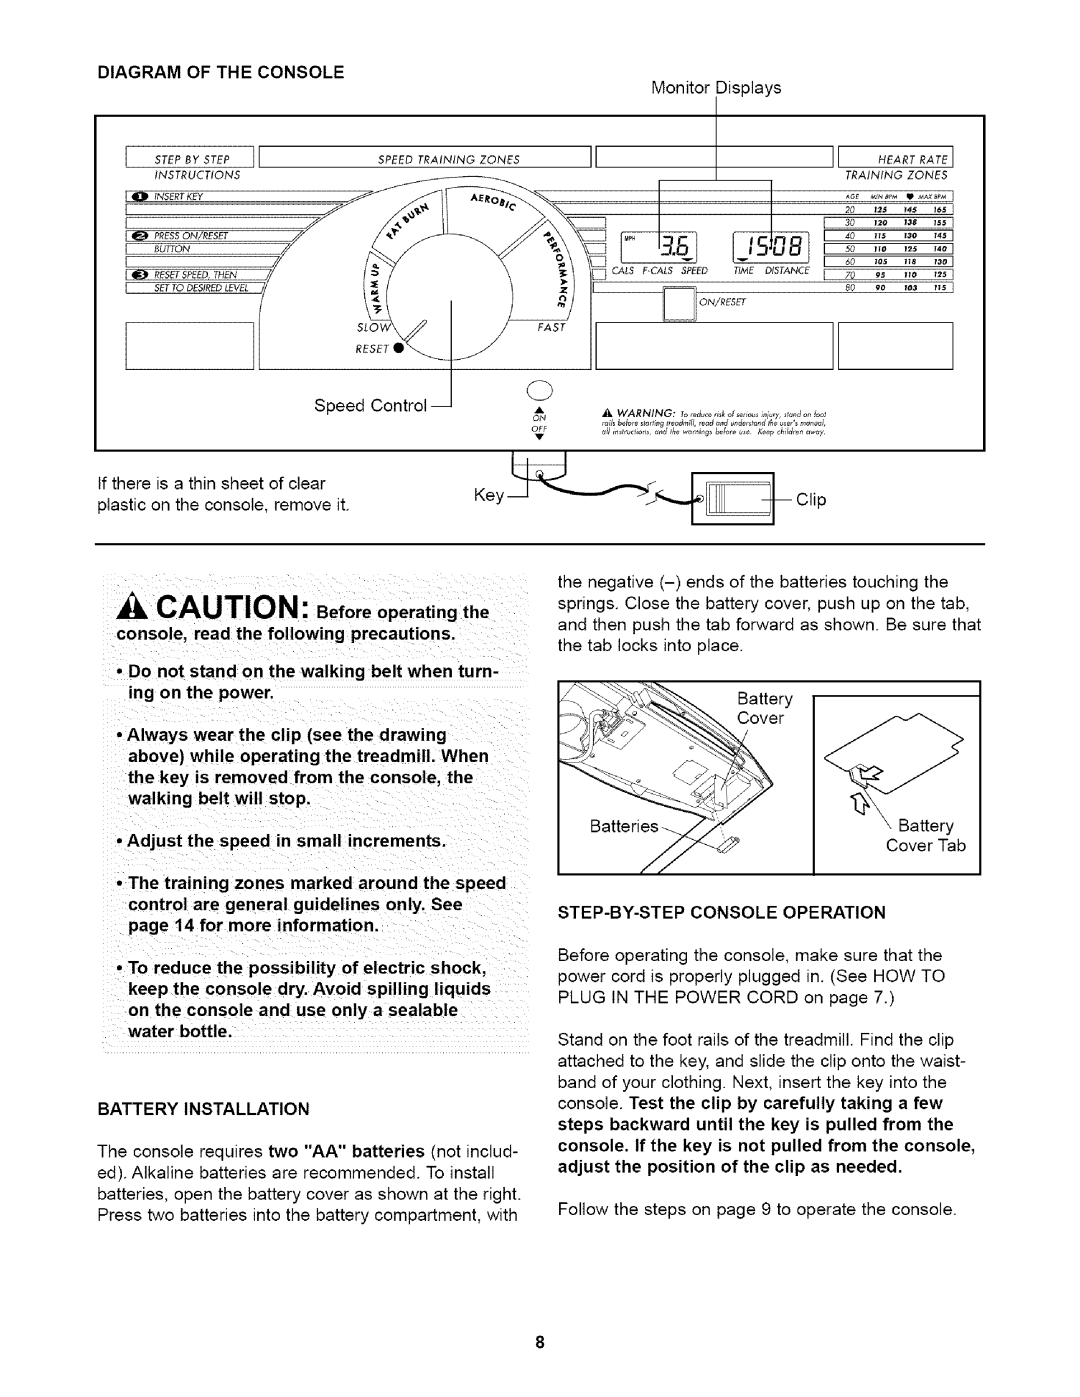 Weslo WLTL29010 A, CAUTION Before operating the, console, read the following precautions, Battery Installation, Displays 